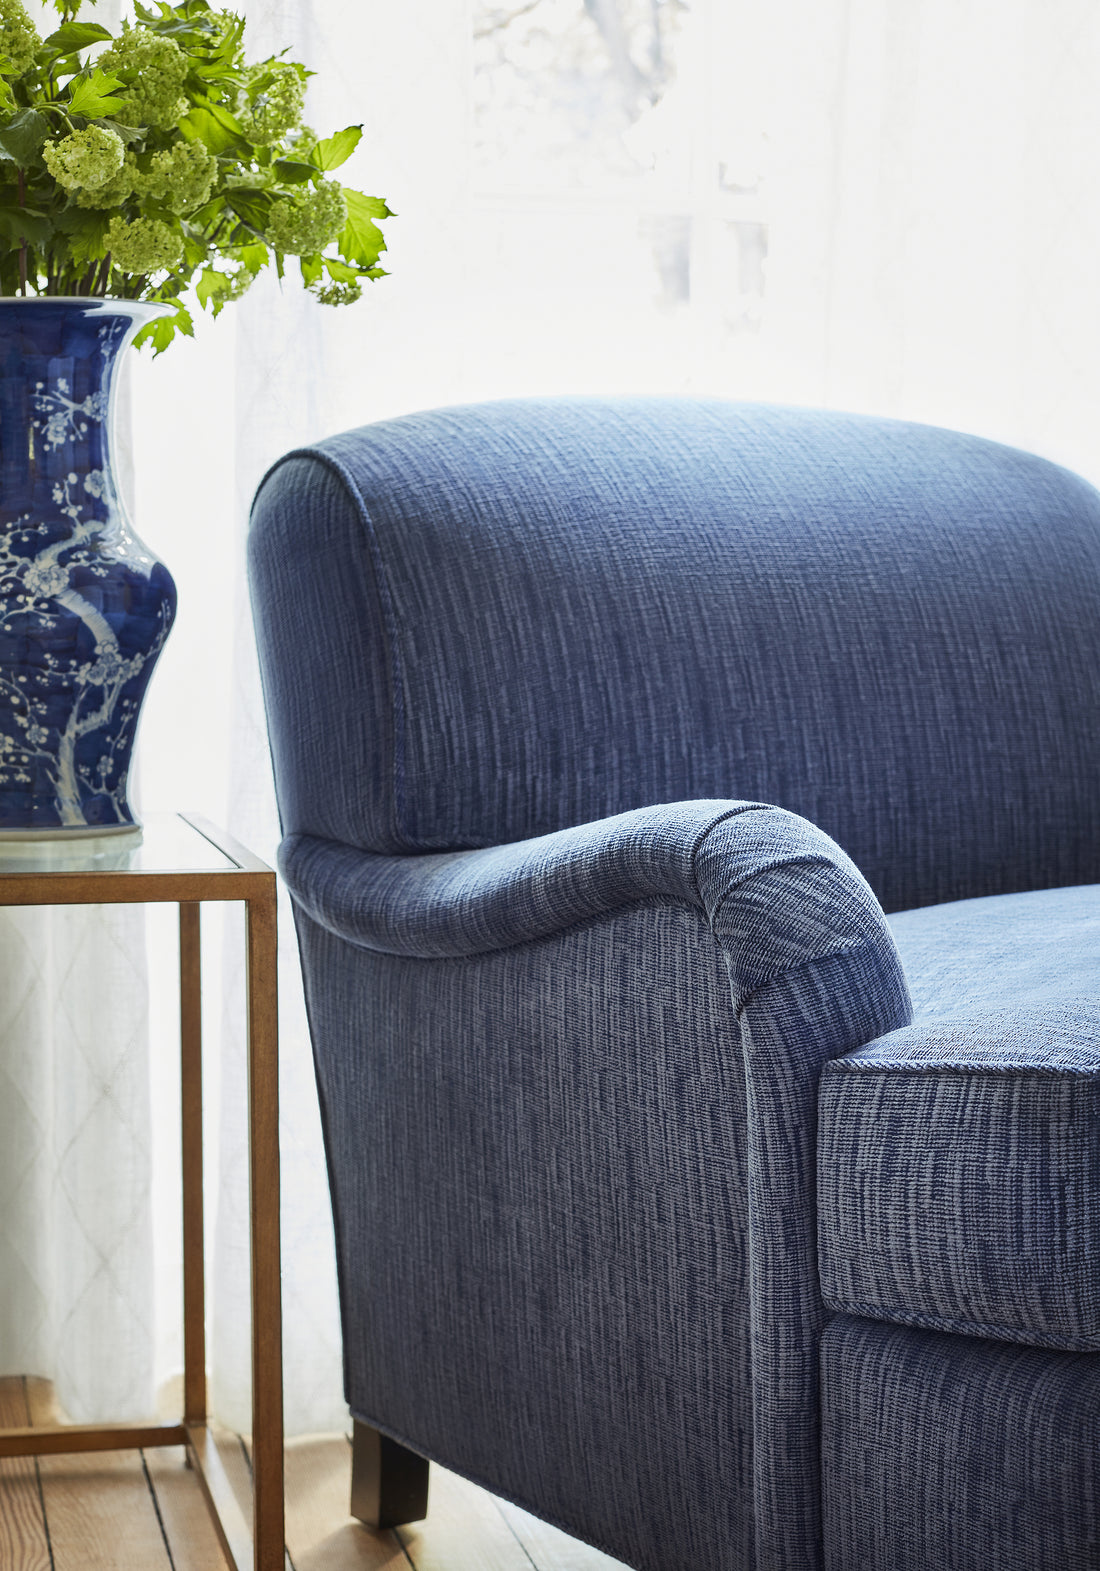 Chatham Chair in Dominic woven fabric in midnight color - pattern number W789122 - by Thibaut in the Reverie collection